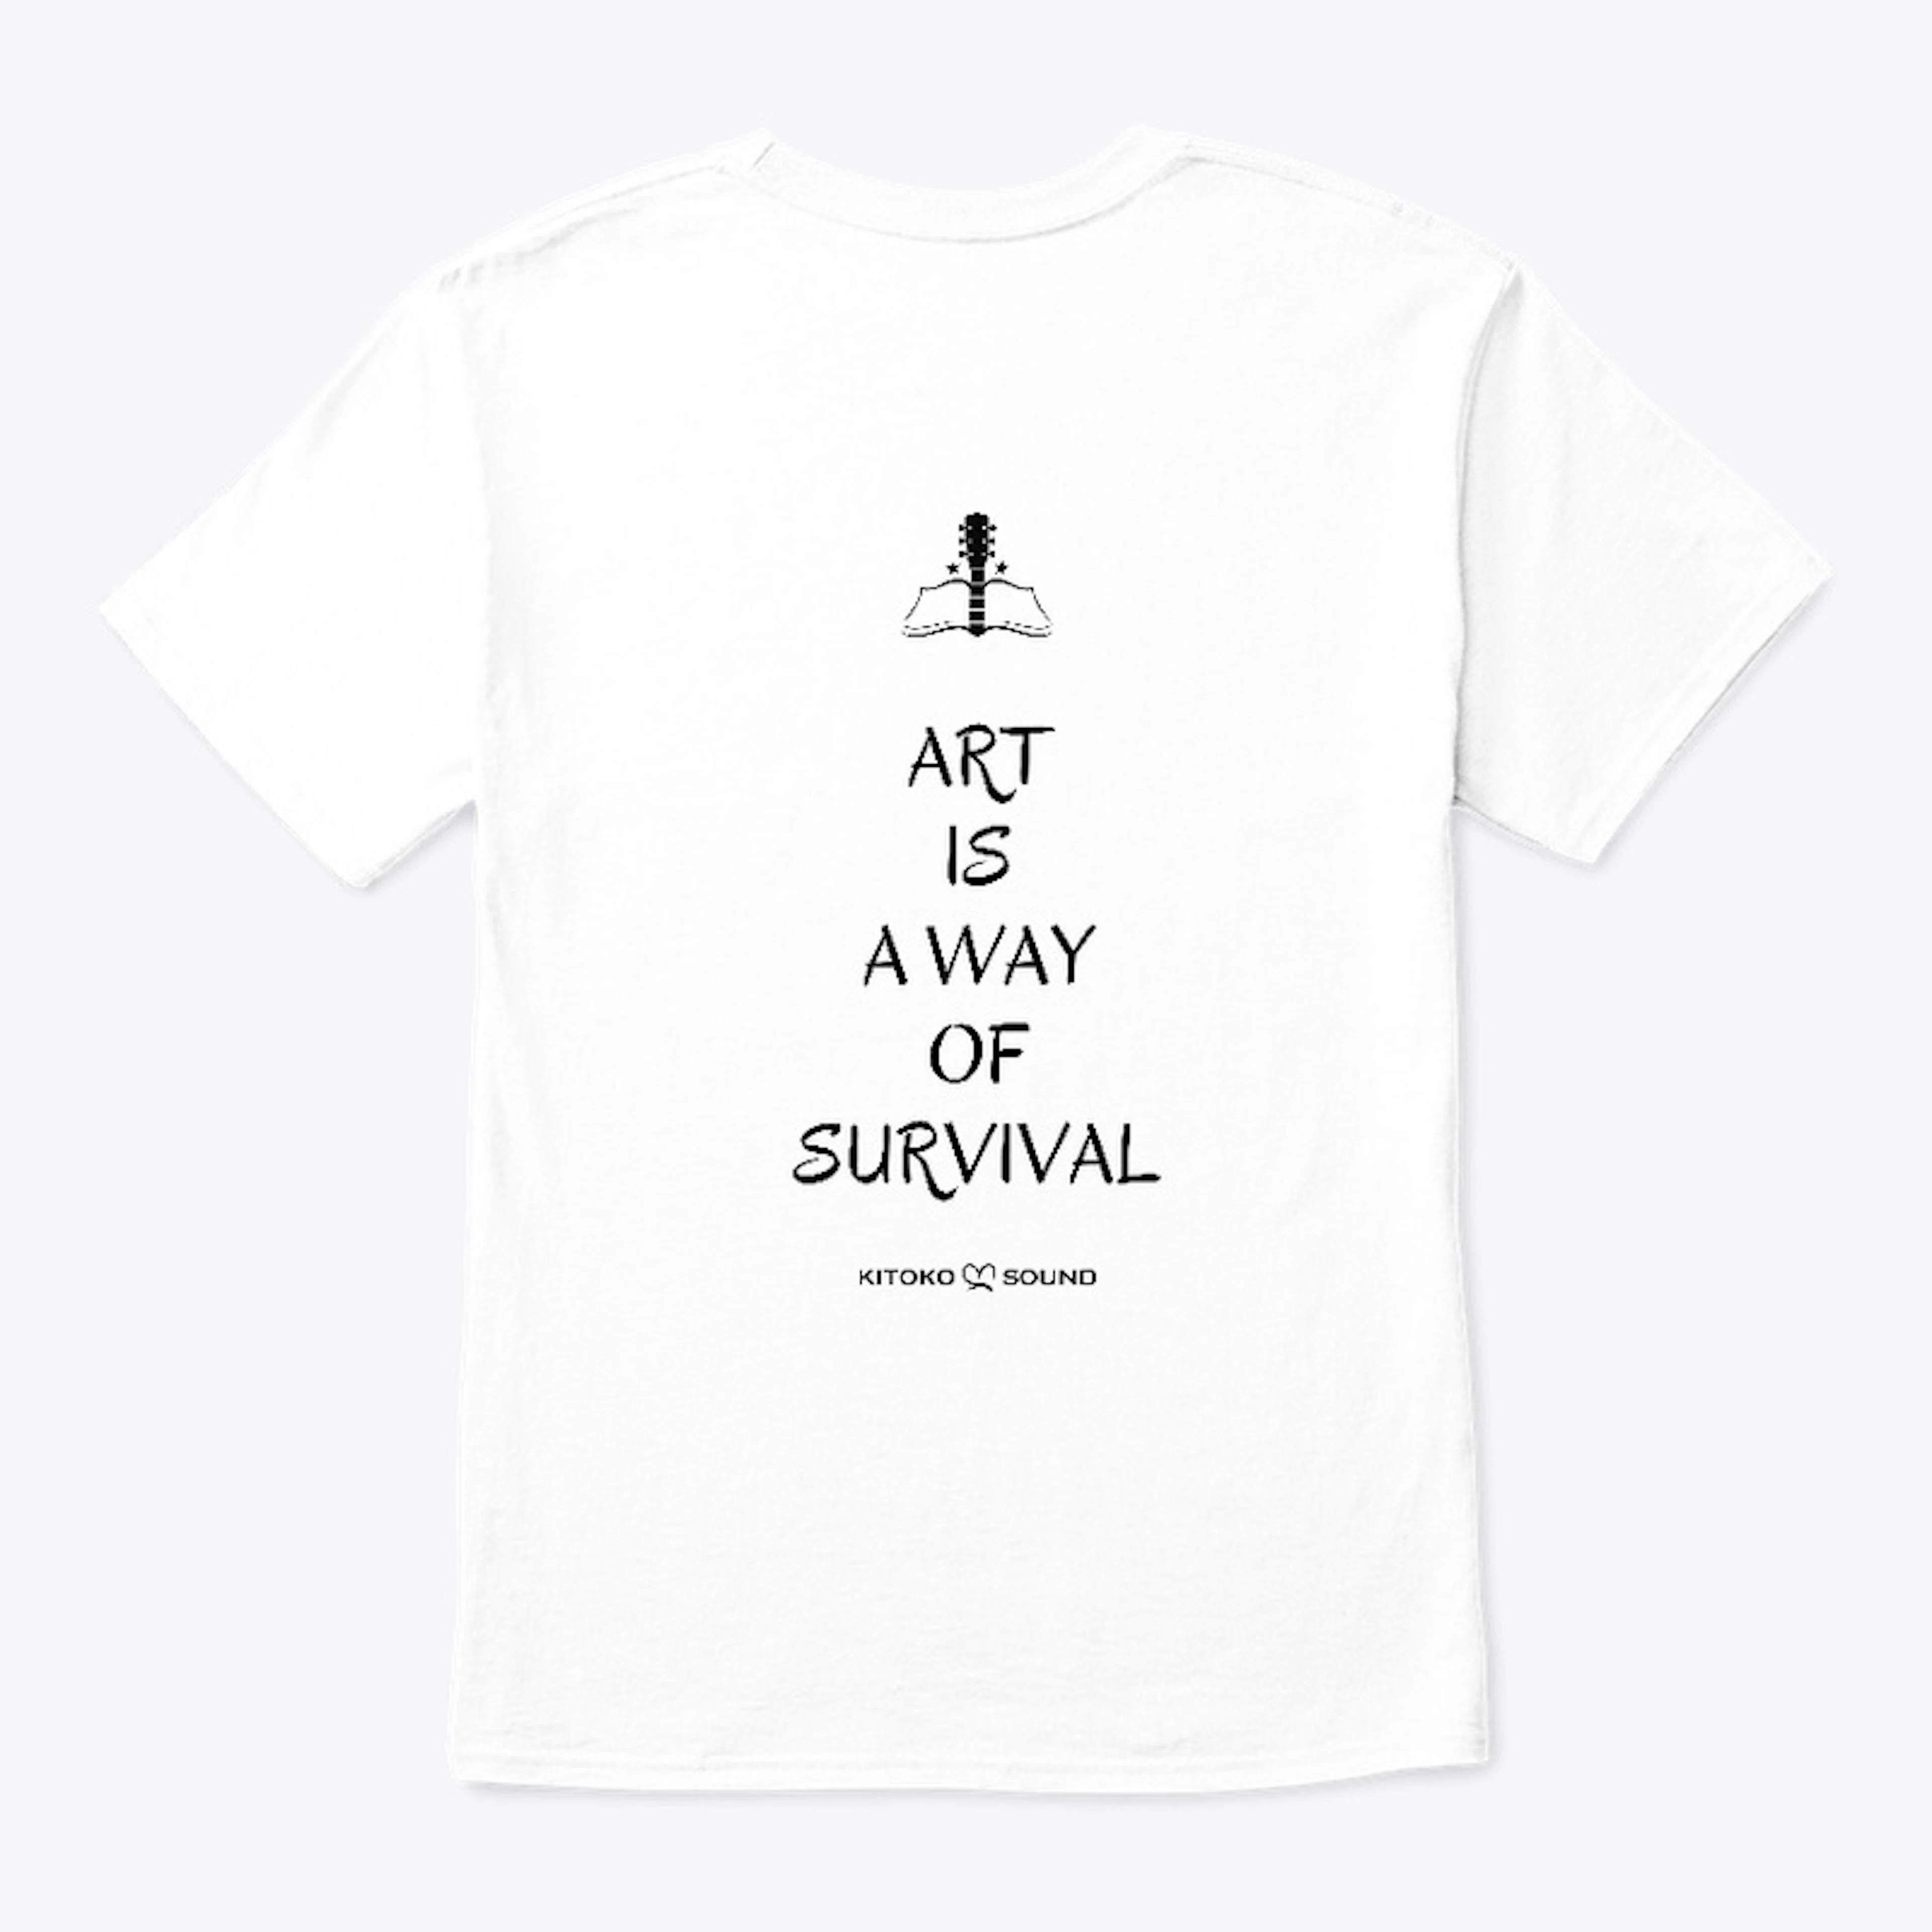 Art is a way of survival